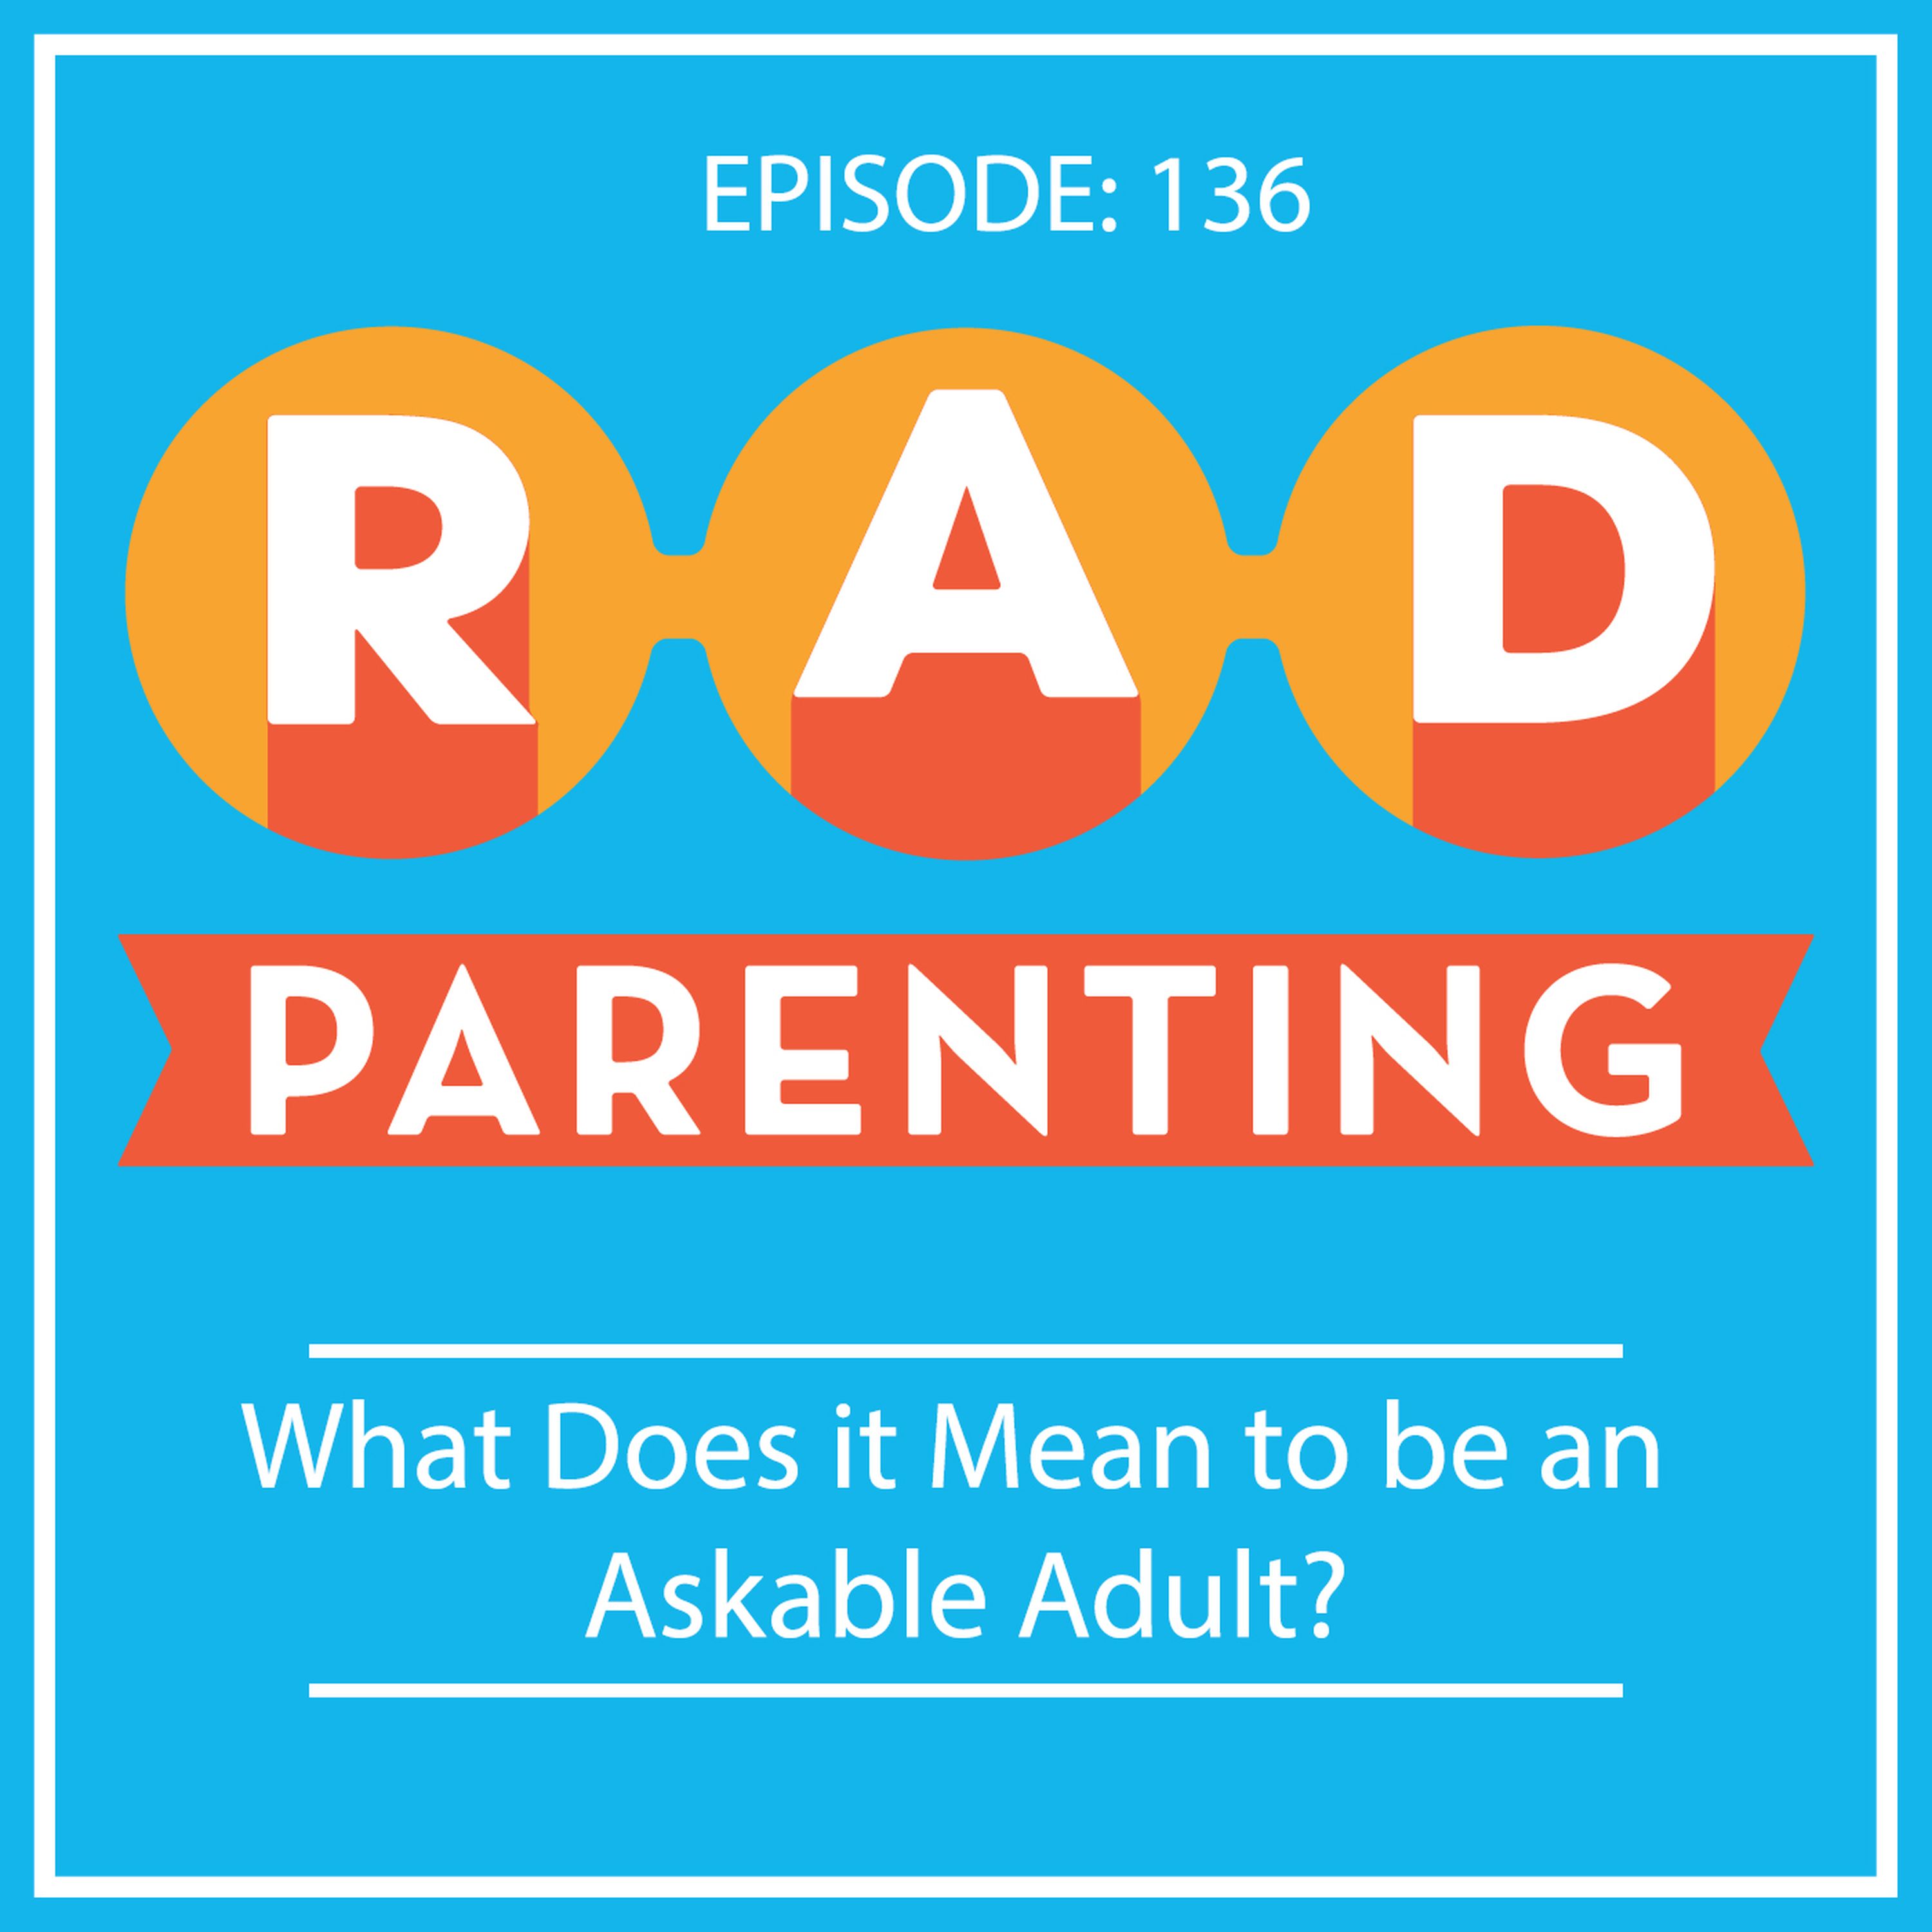 What Does it Mean to be an Askable Adult?